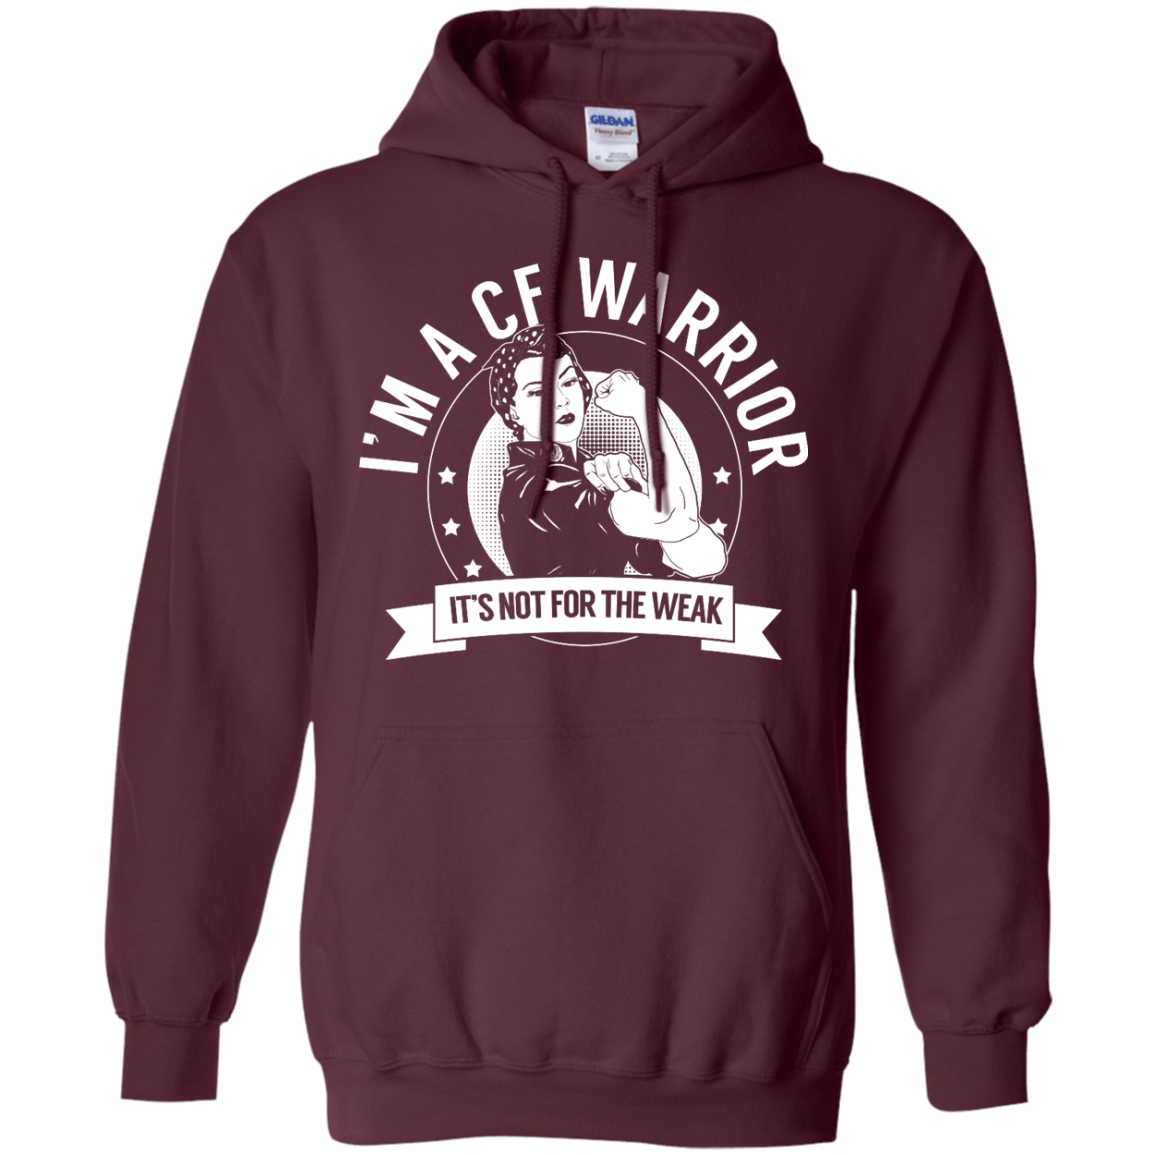 Cystic Fibrosis - CF Warrior Not For The Weak Pullover Hoodie 8 oz - The Unchargeables